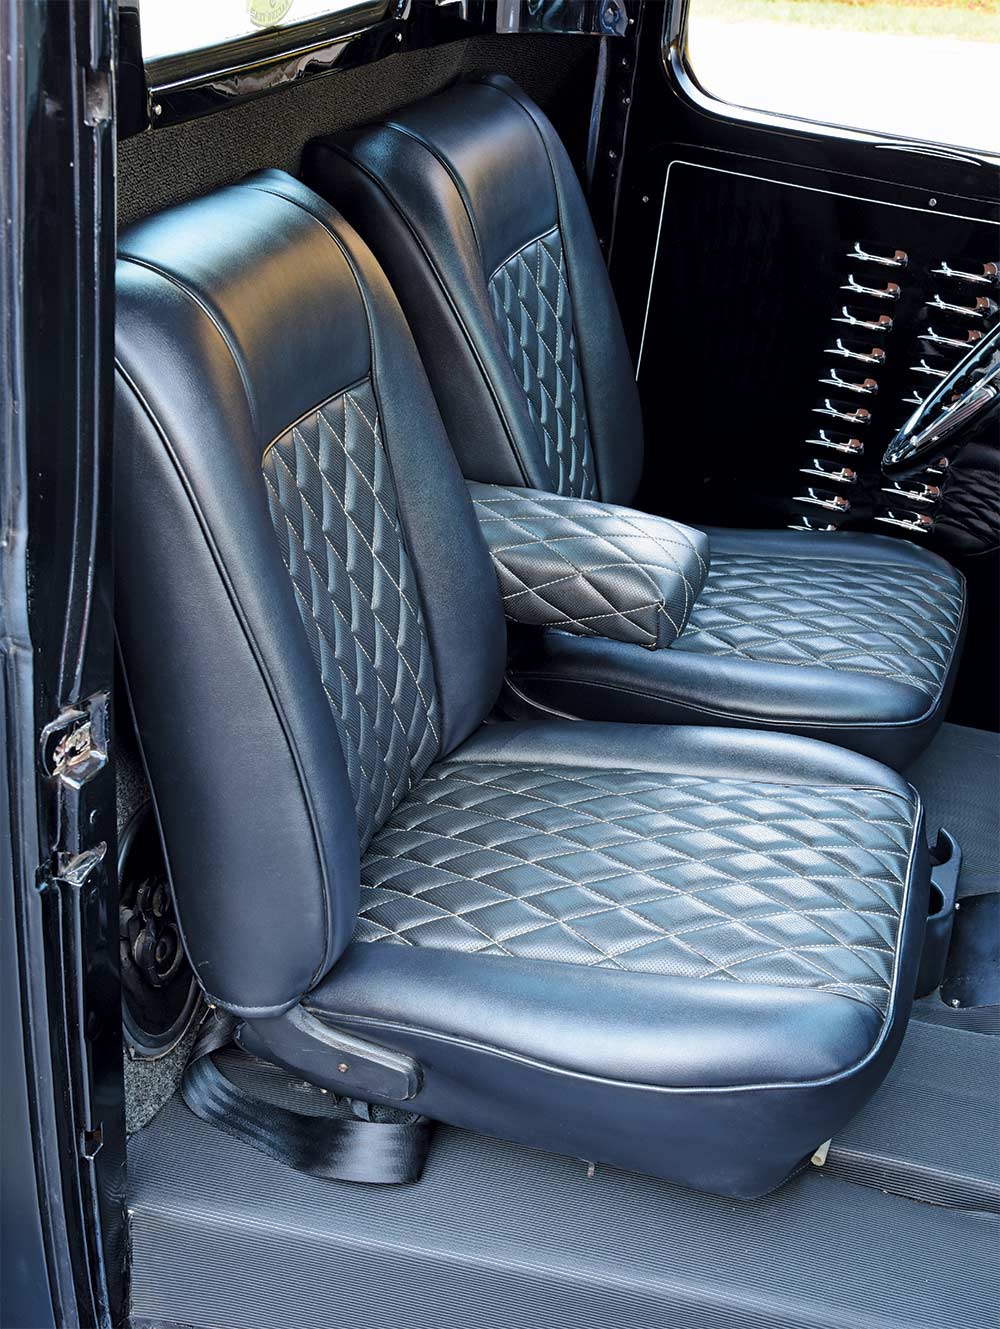 Seats of the 1940 Ford